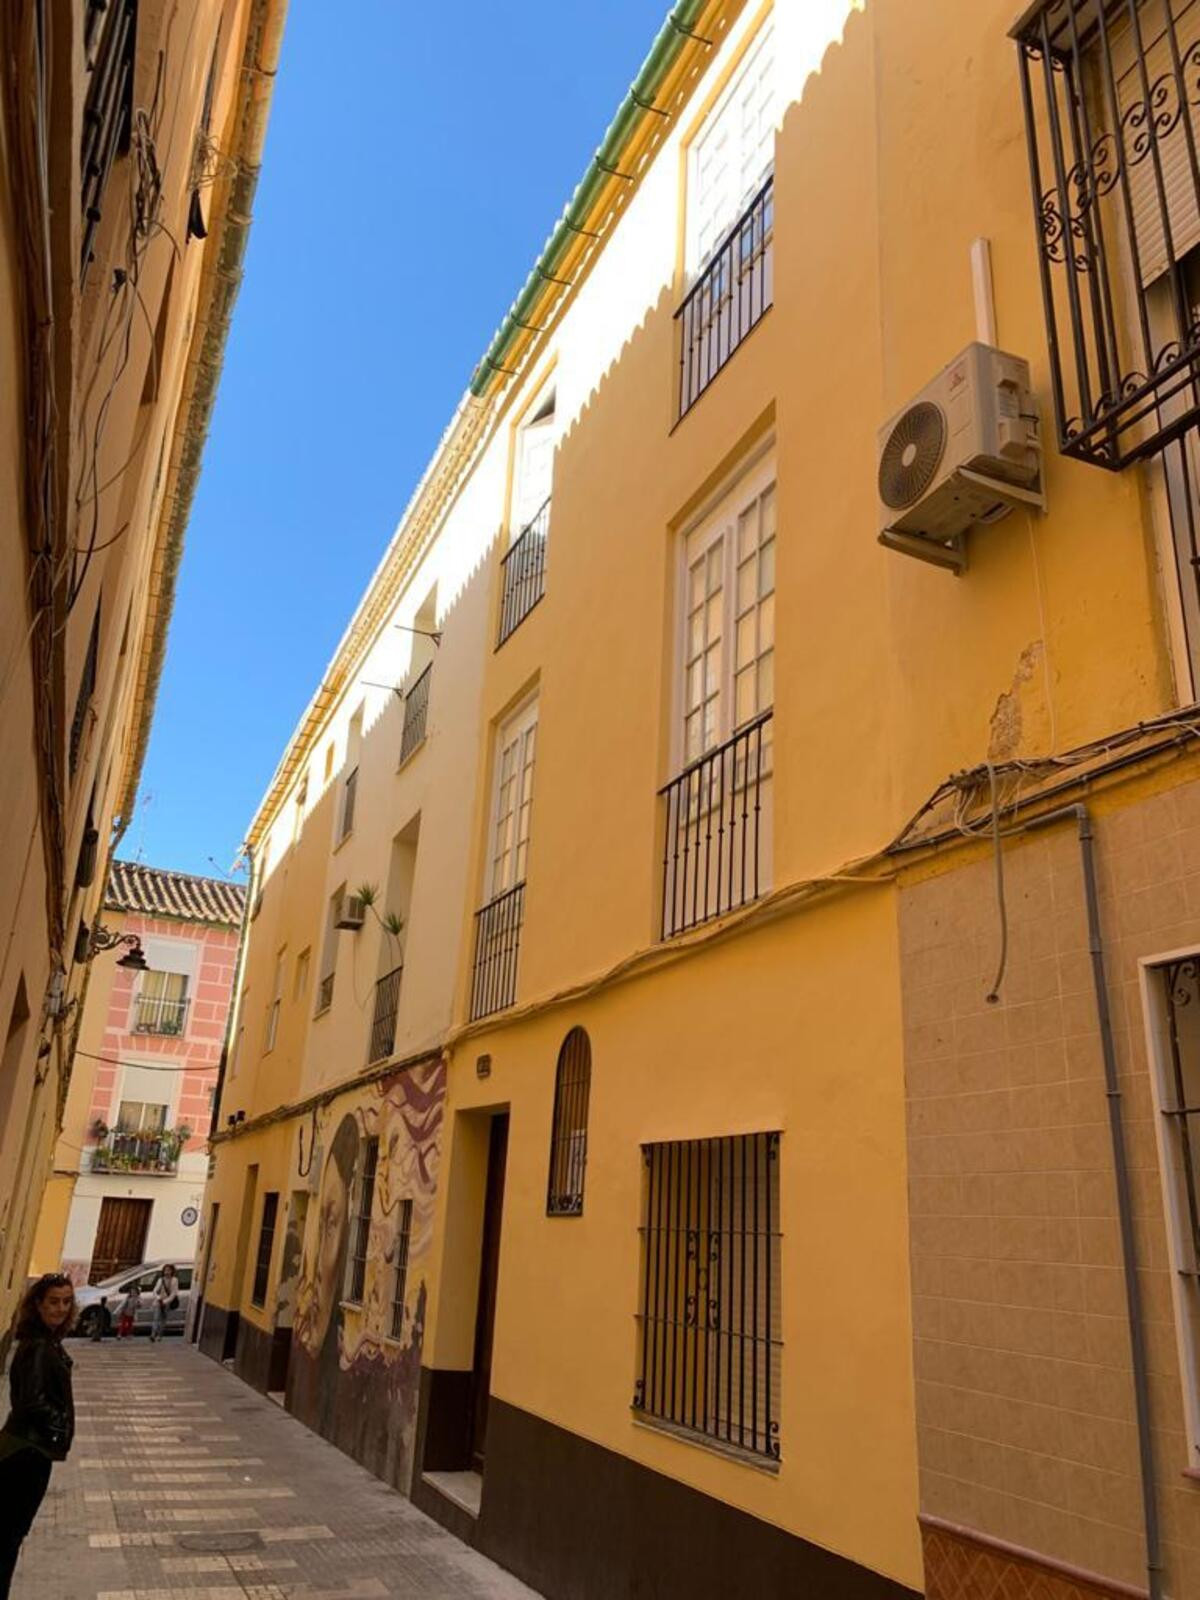 A 3-storey building is for sale! The tolal of 228 m2, located right behind Plaza Merced, in the hist, Spain